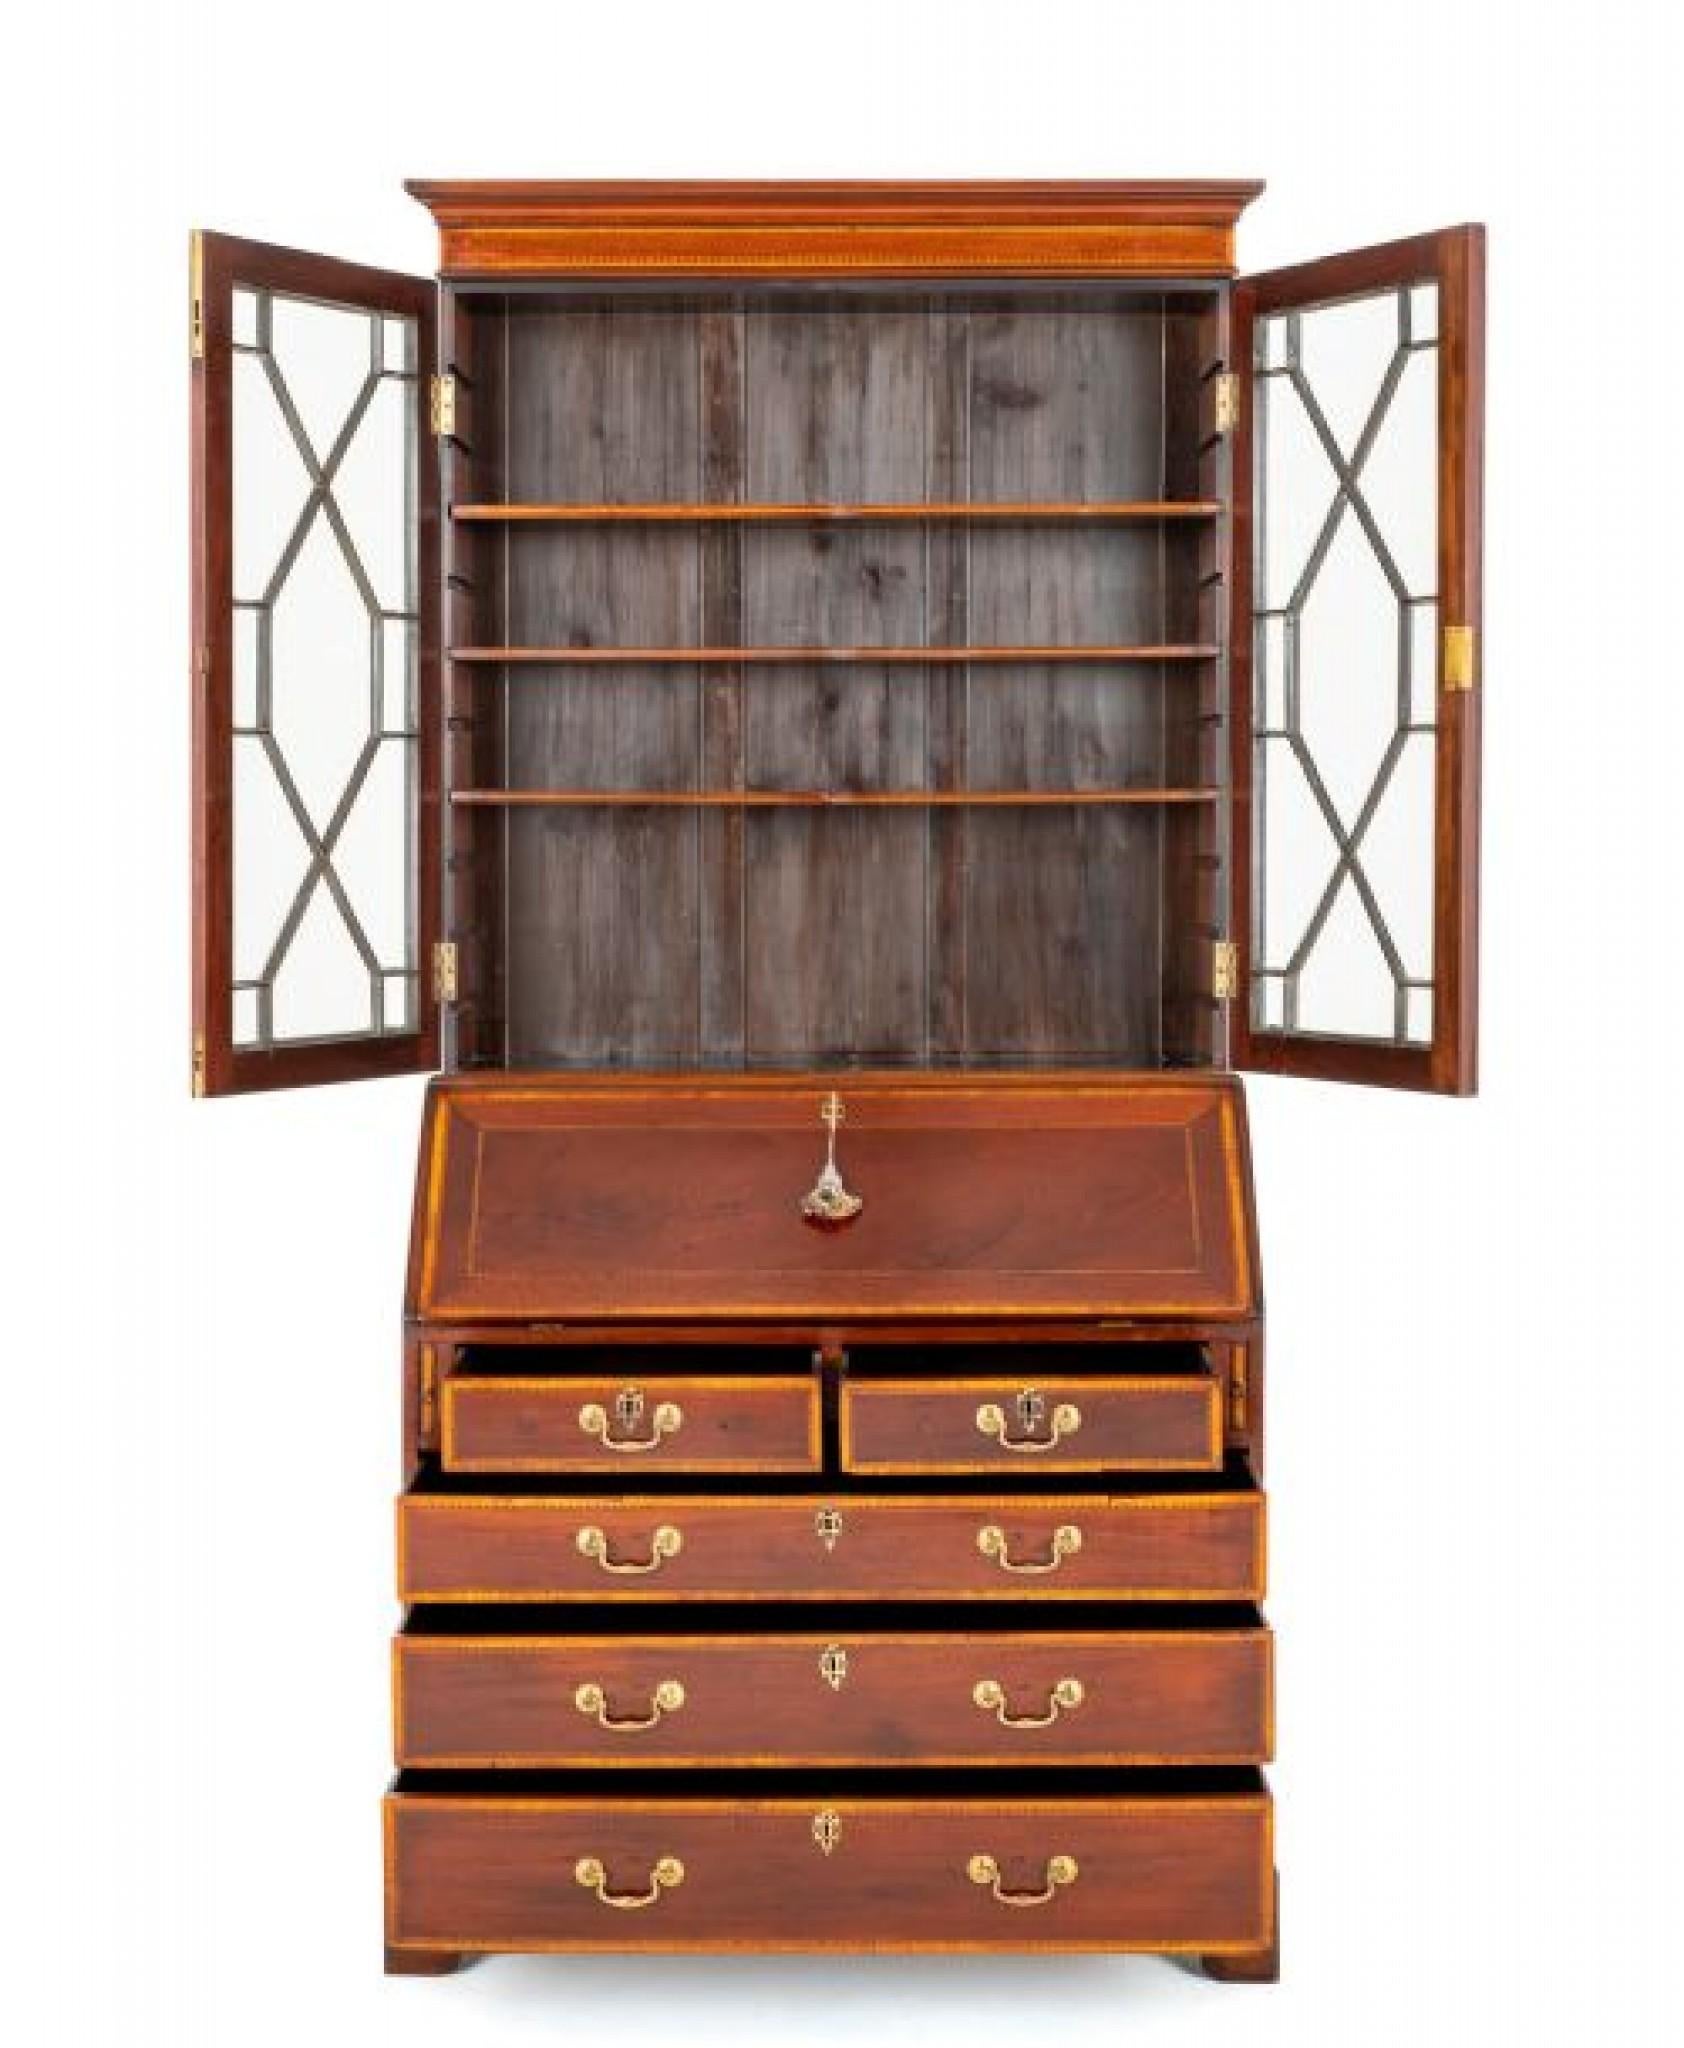 Georgian Mahogany Bureau Bookcase.
The Base Having an Arrangement of 2 Over 3 Oak Lined Drawers With Brass Swan Neck handles.
circa 1800
The Fall Opens to Reveal a Leather Writing Surface (replacement) with hand Applied Gilt and Blind Tooling and